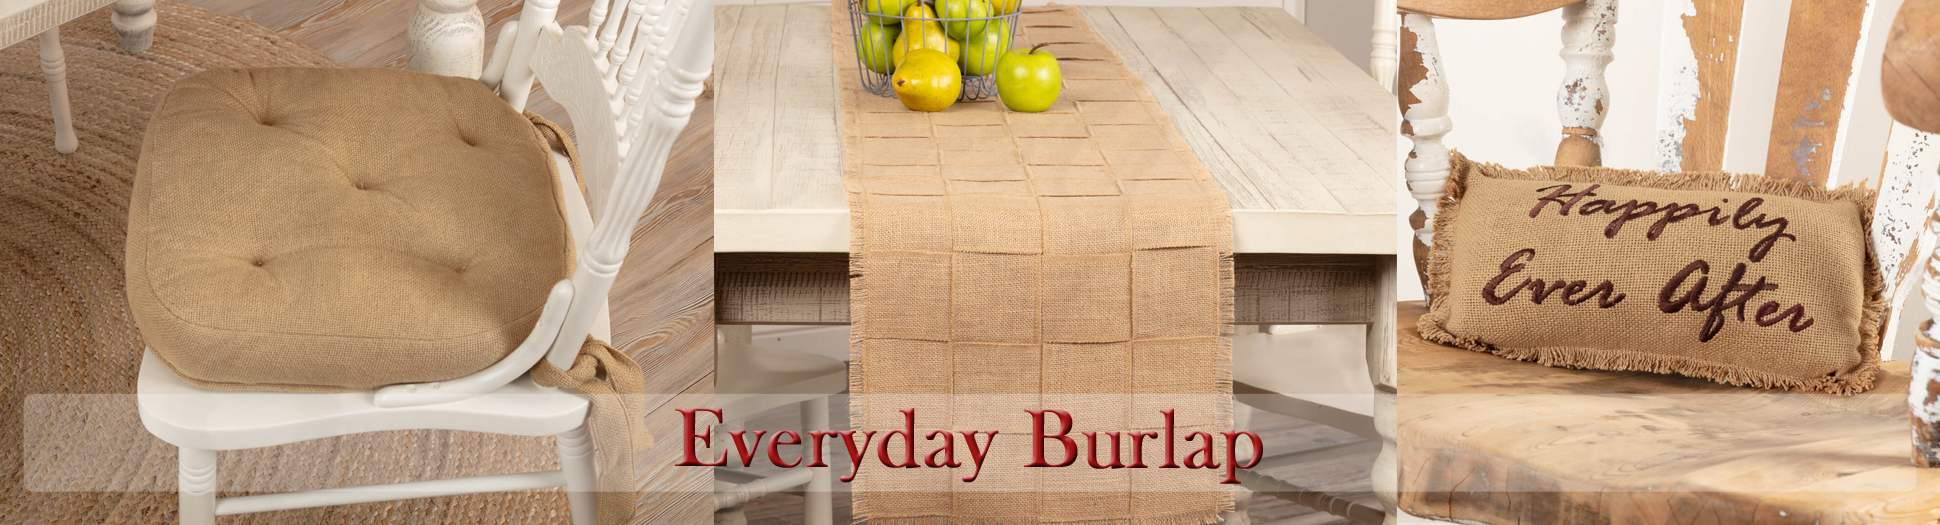 Shop Everyday Burlap for Bed Bath and Tabletop